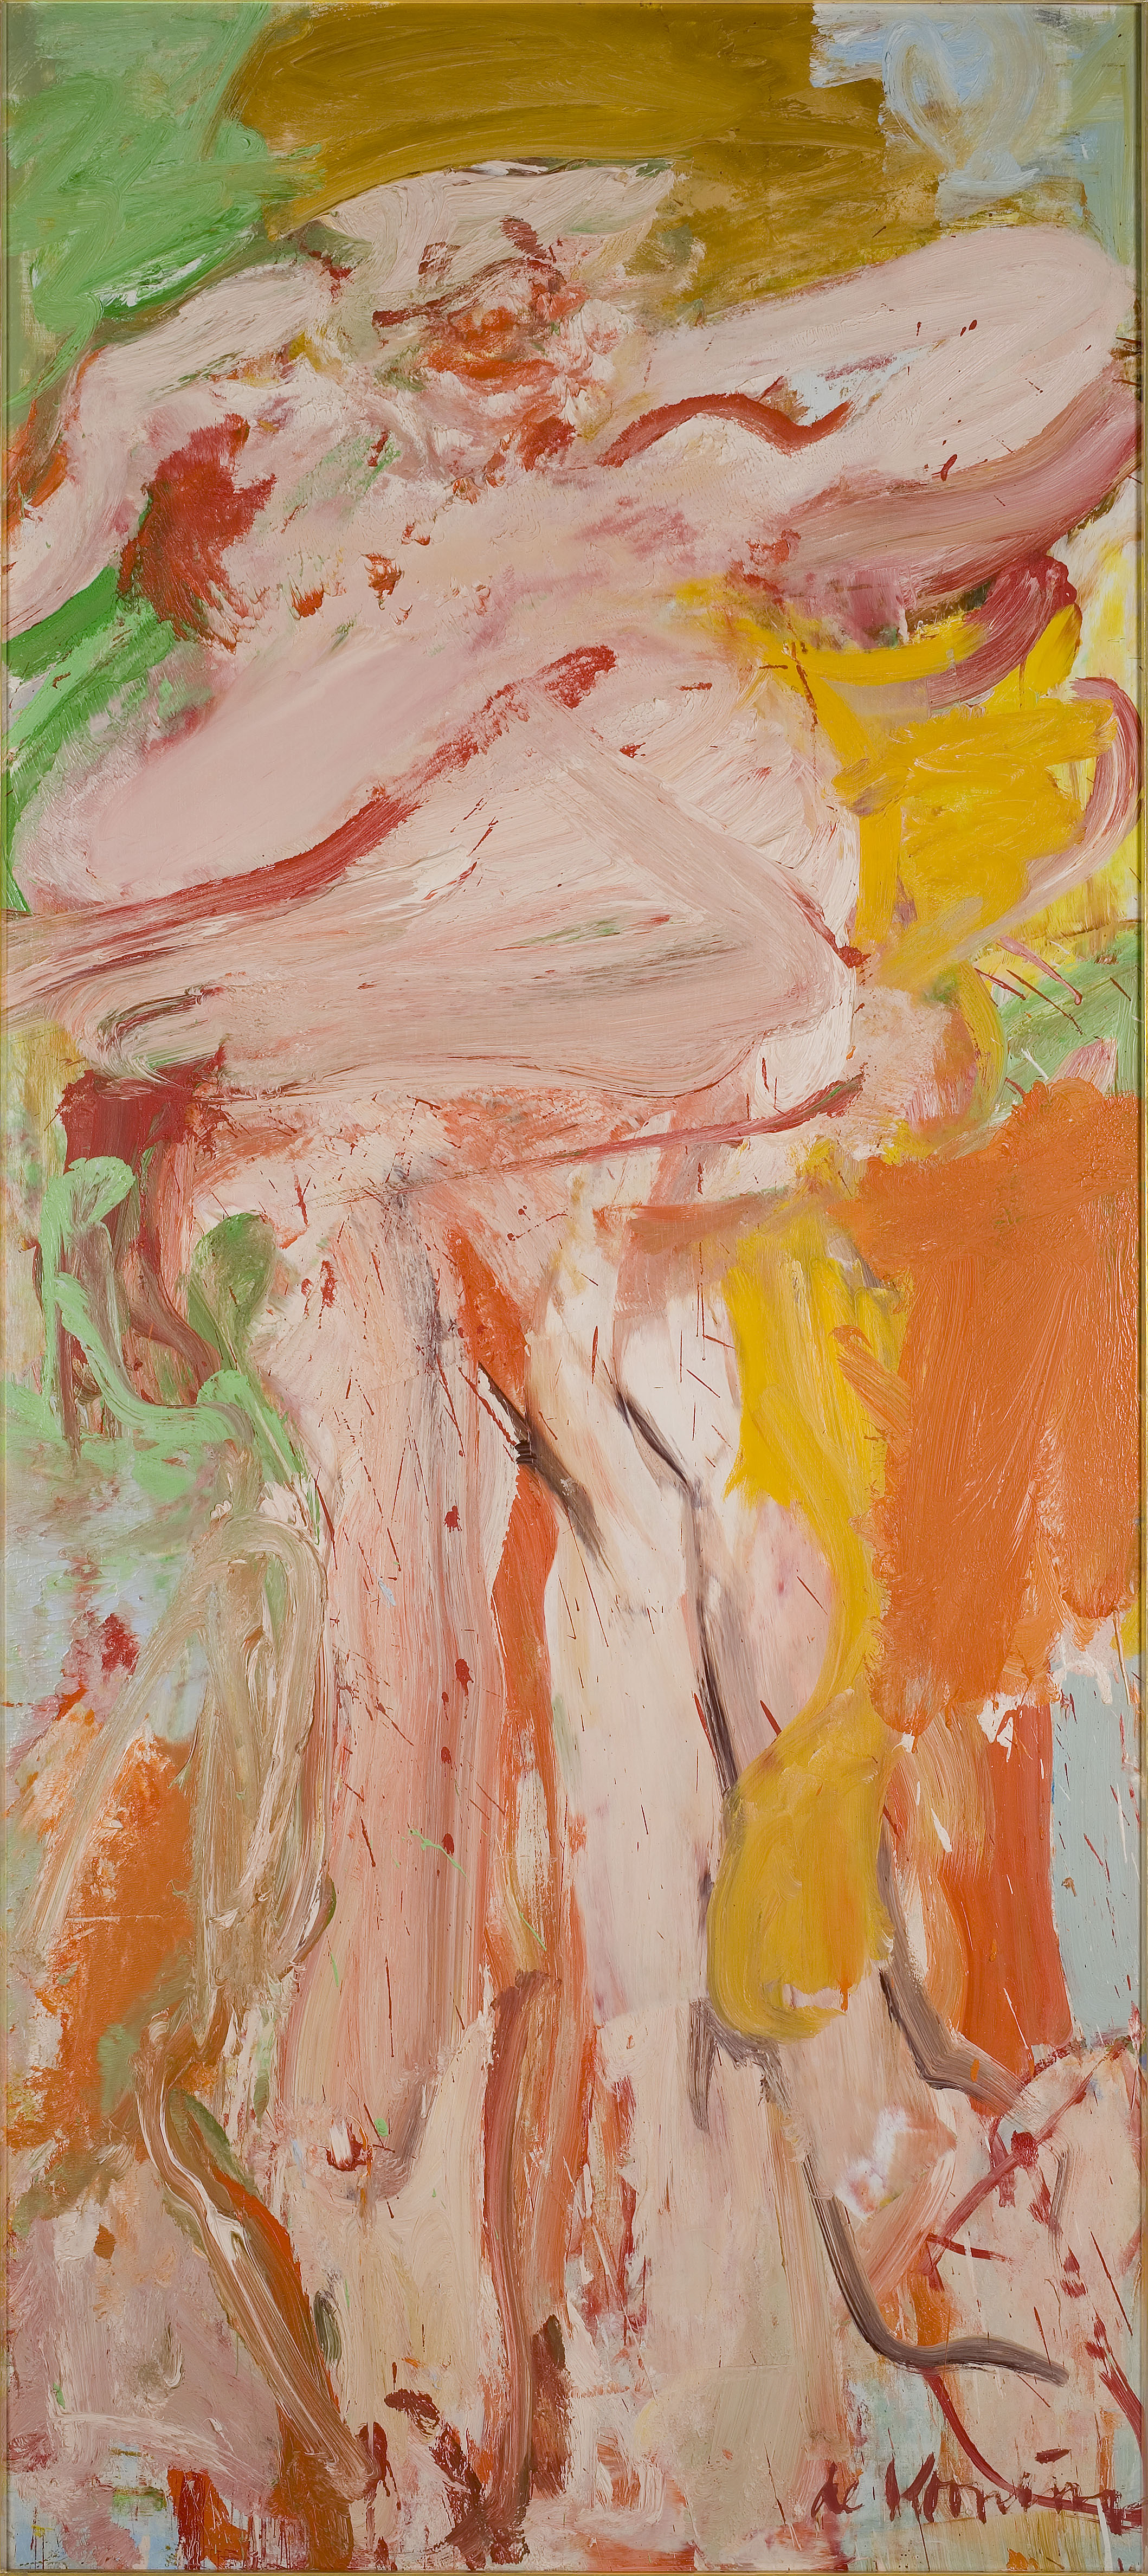 A de Kooning that will be removed from the Davis Museum's galleries tomorrow